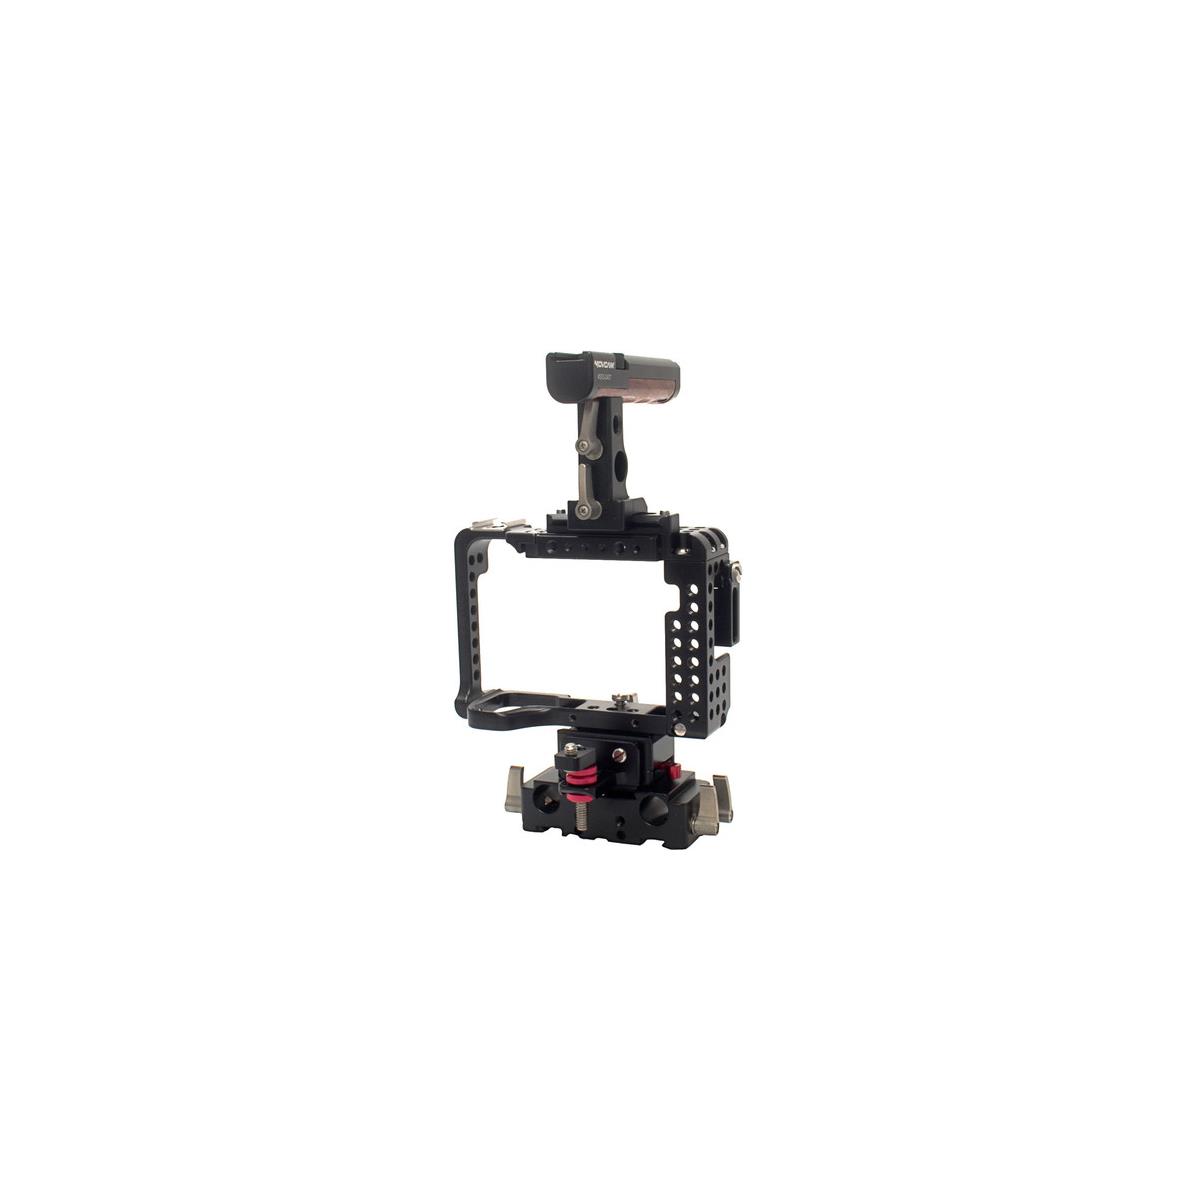 Image of Movcam Twist Cage Kit Plus Access for Sony a7 II / a7R II / a7S II